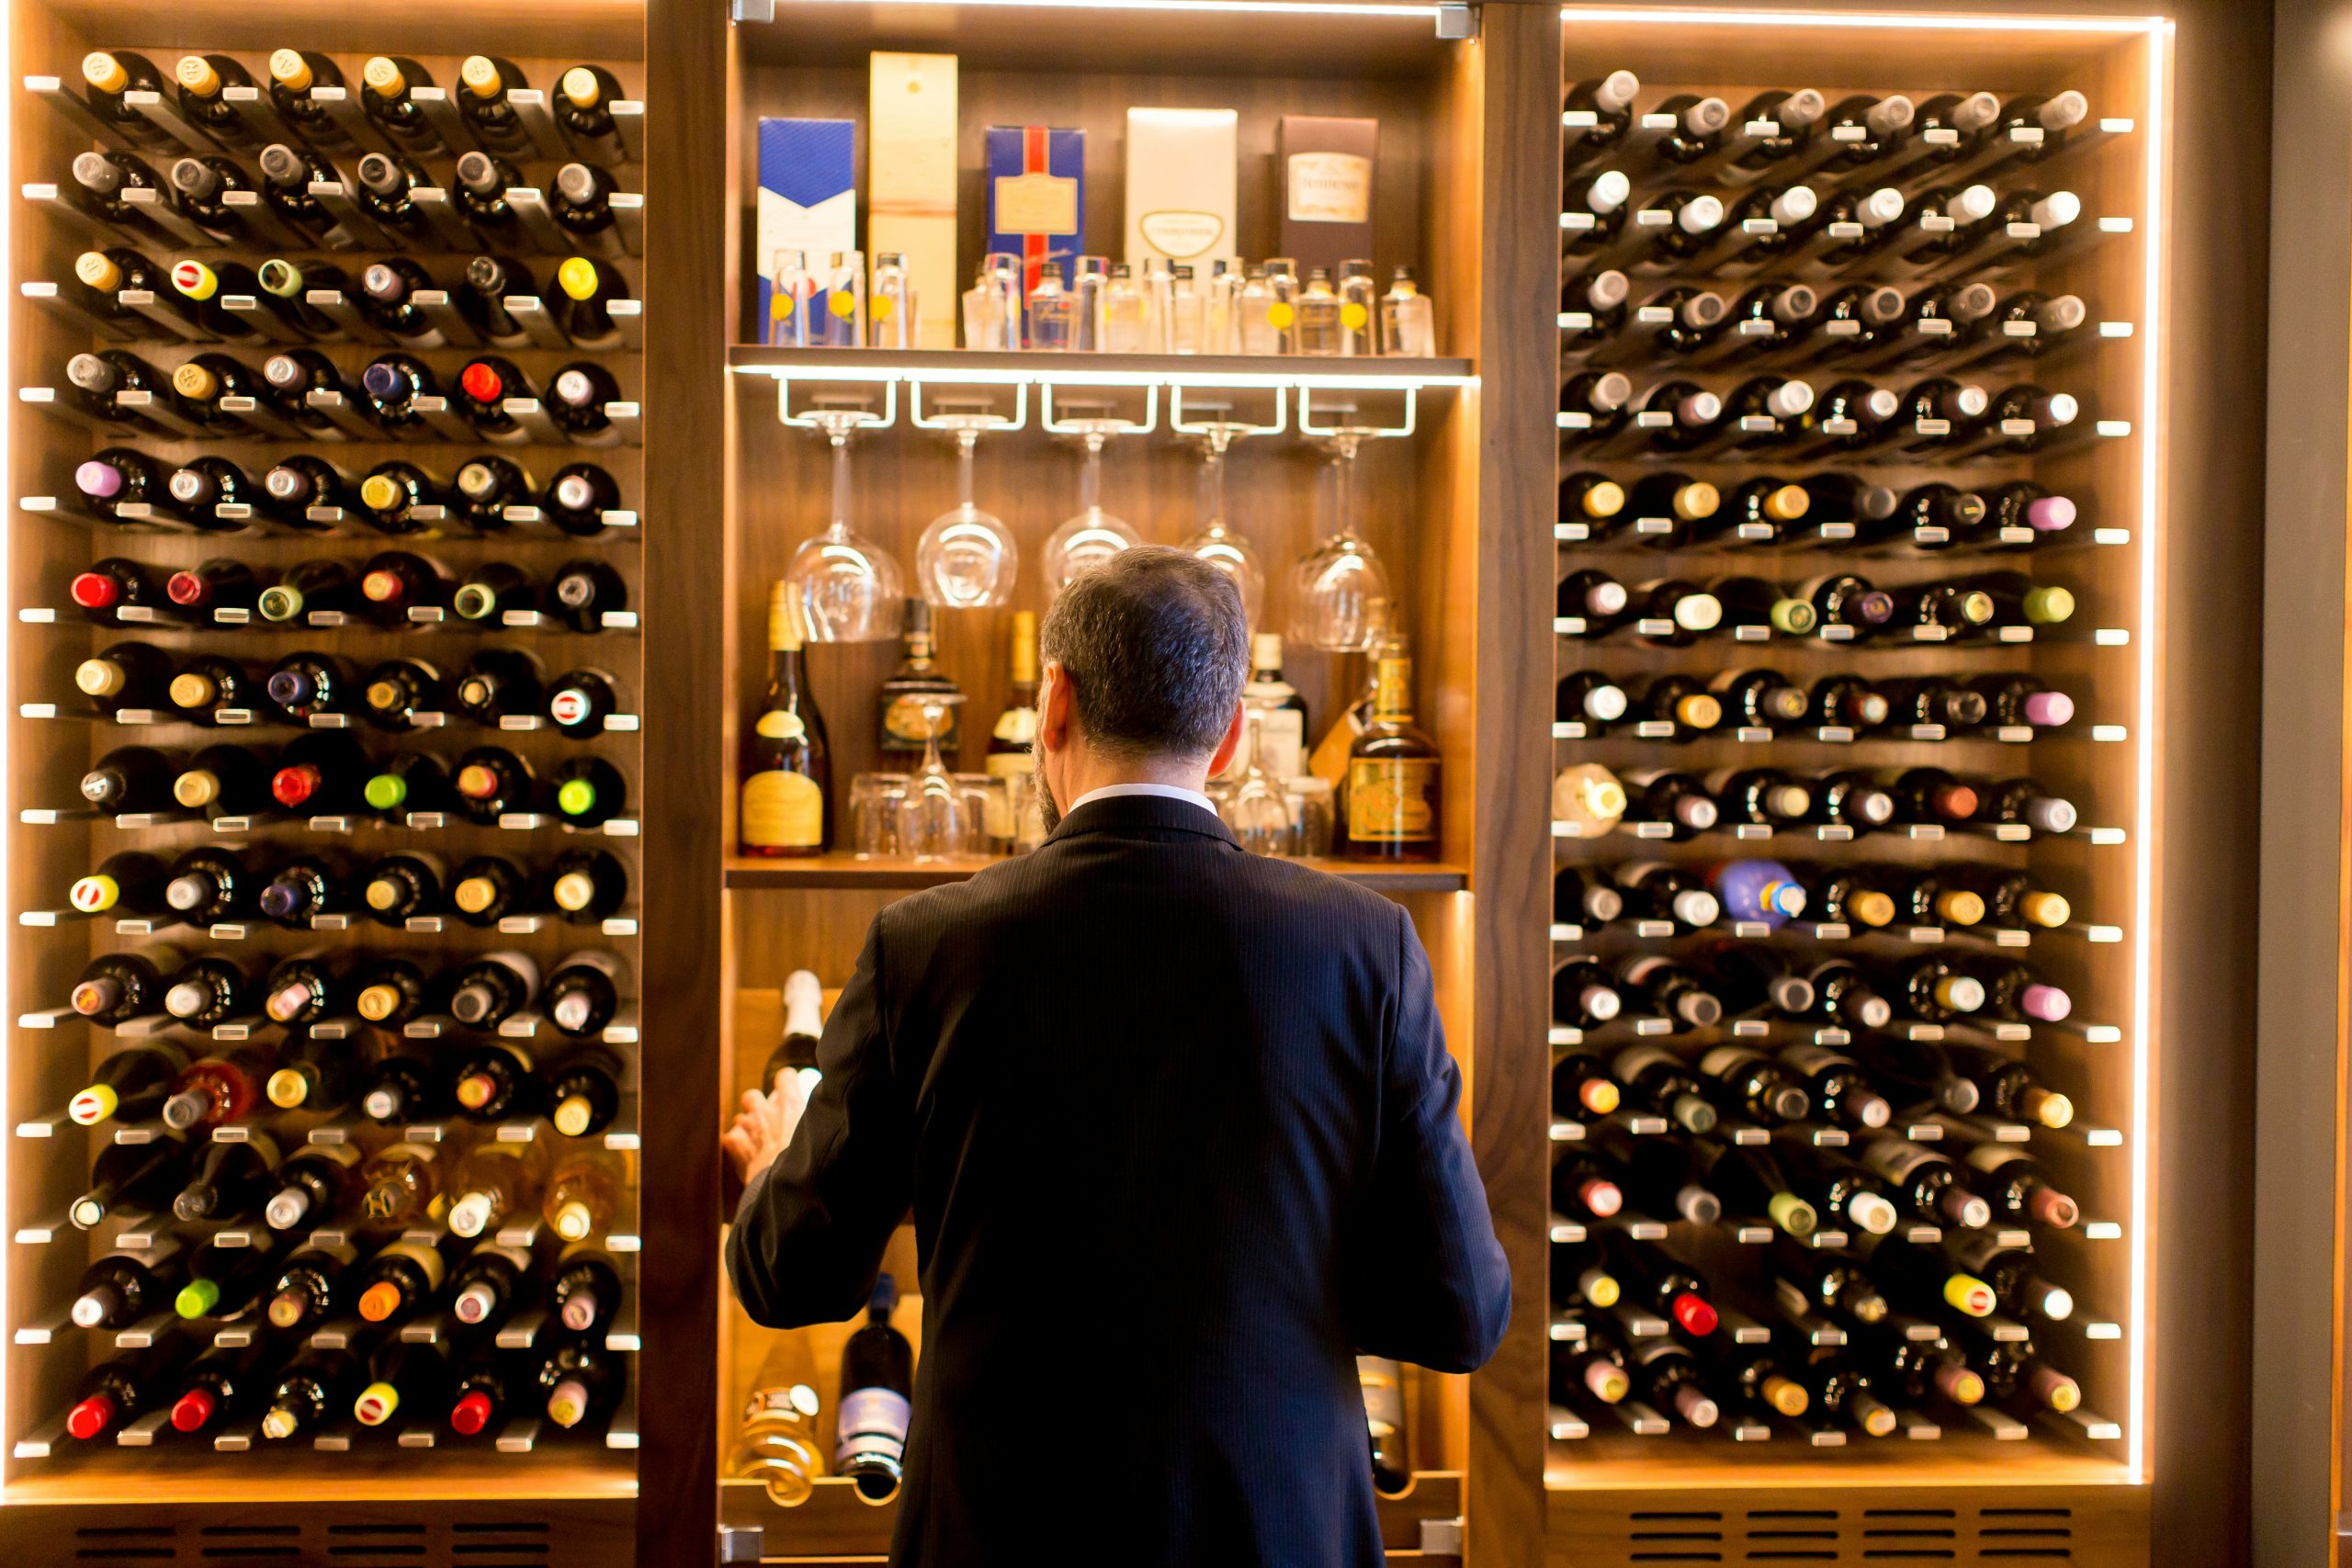 Male server in a suit looking at a restaurant wine cellar, photographed from behind